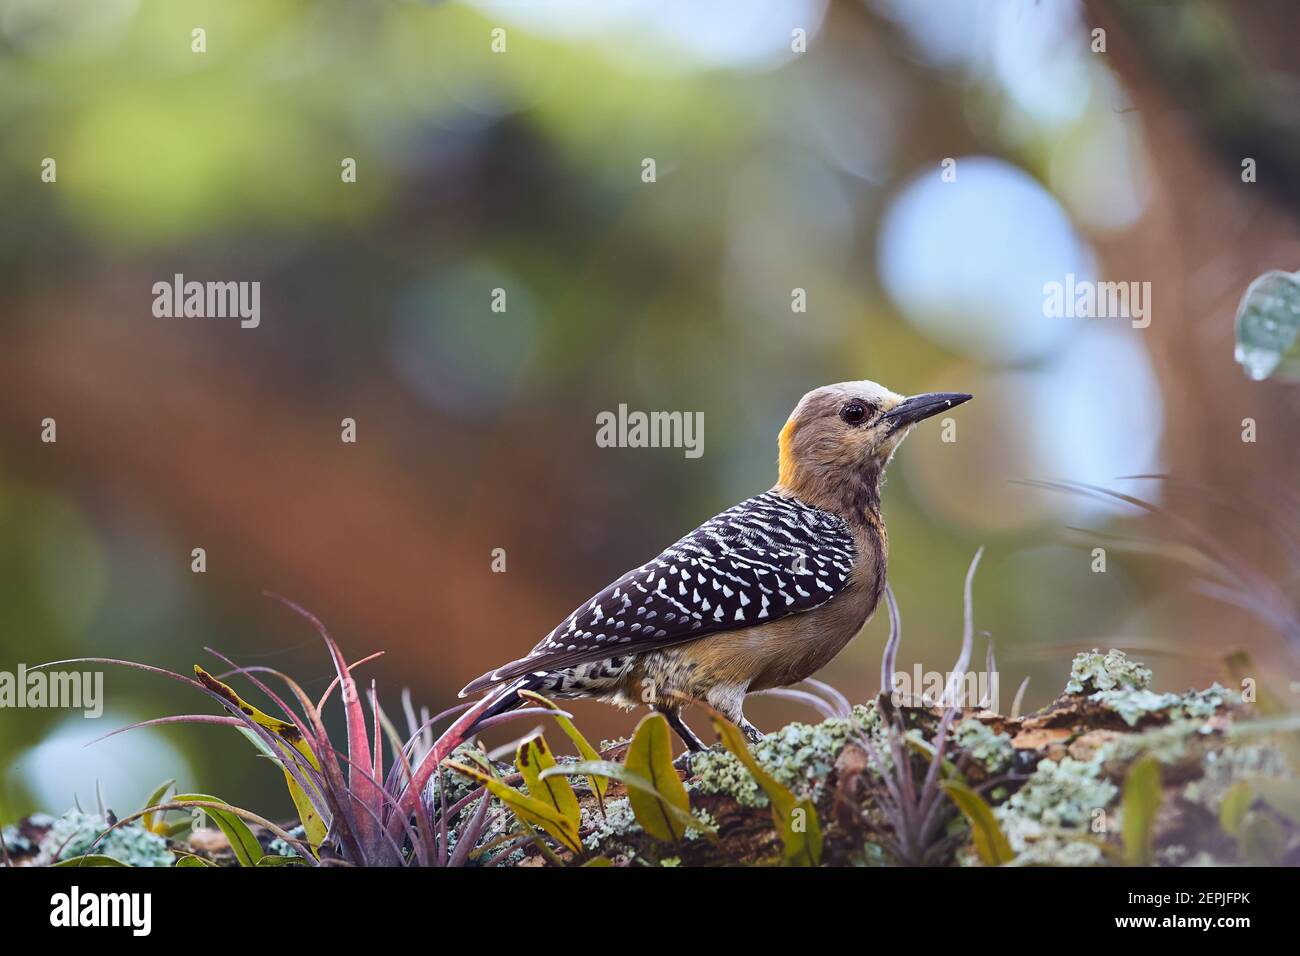 Hoffmann's woodpecker, Melanerpes hoffmannii, tropical woodpecker with barred back and wings, looking for insects among epiphytes on tropical, old tre Stock Photo